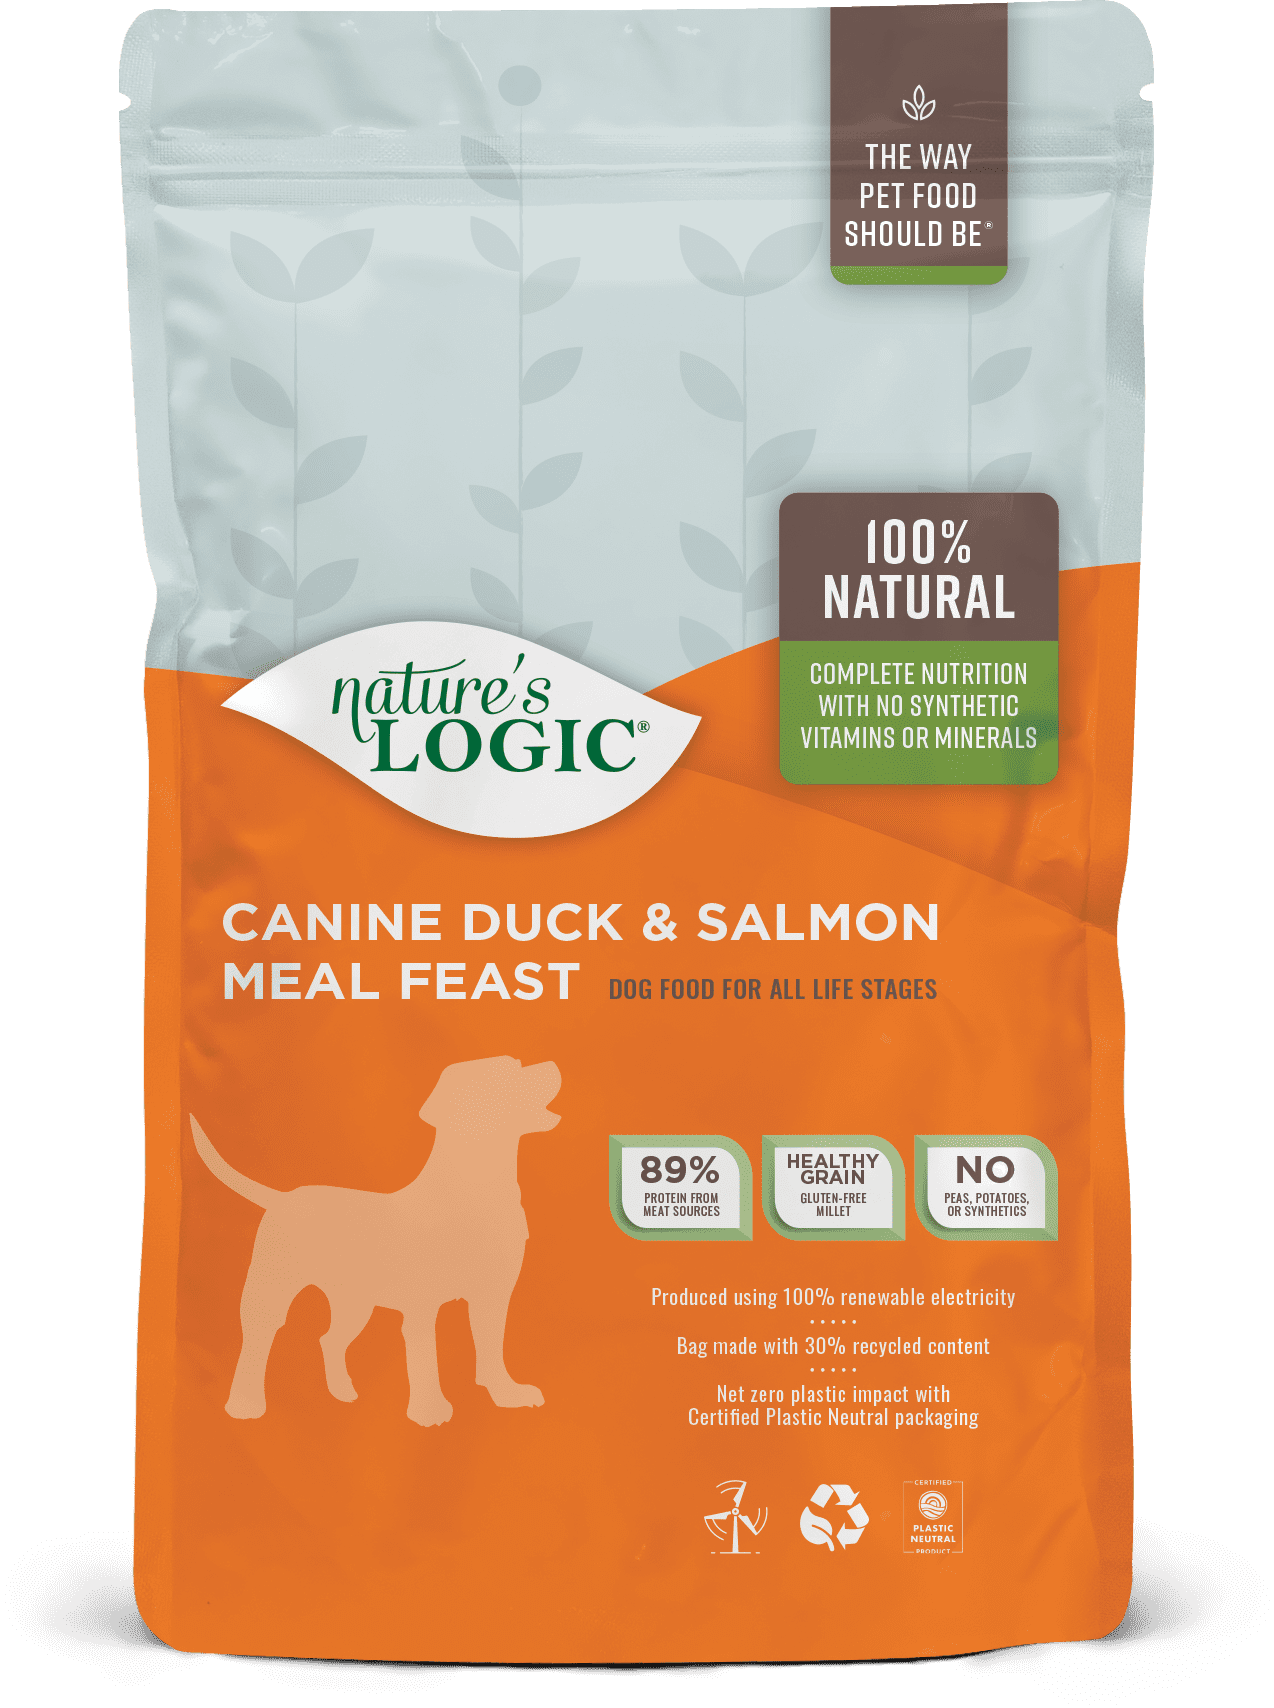 Nature's Logic Canine Duck & Salmon Meal Feast bag.